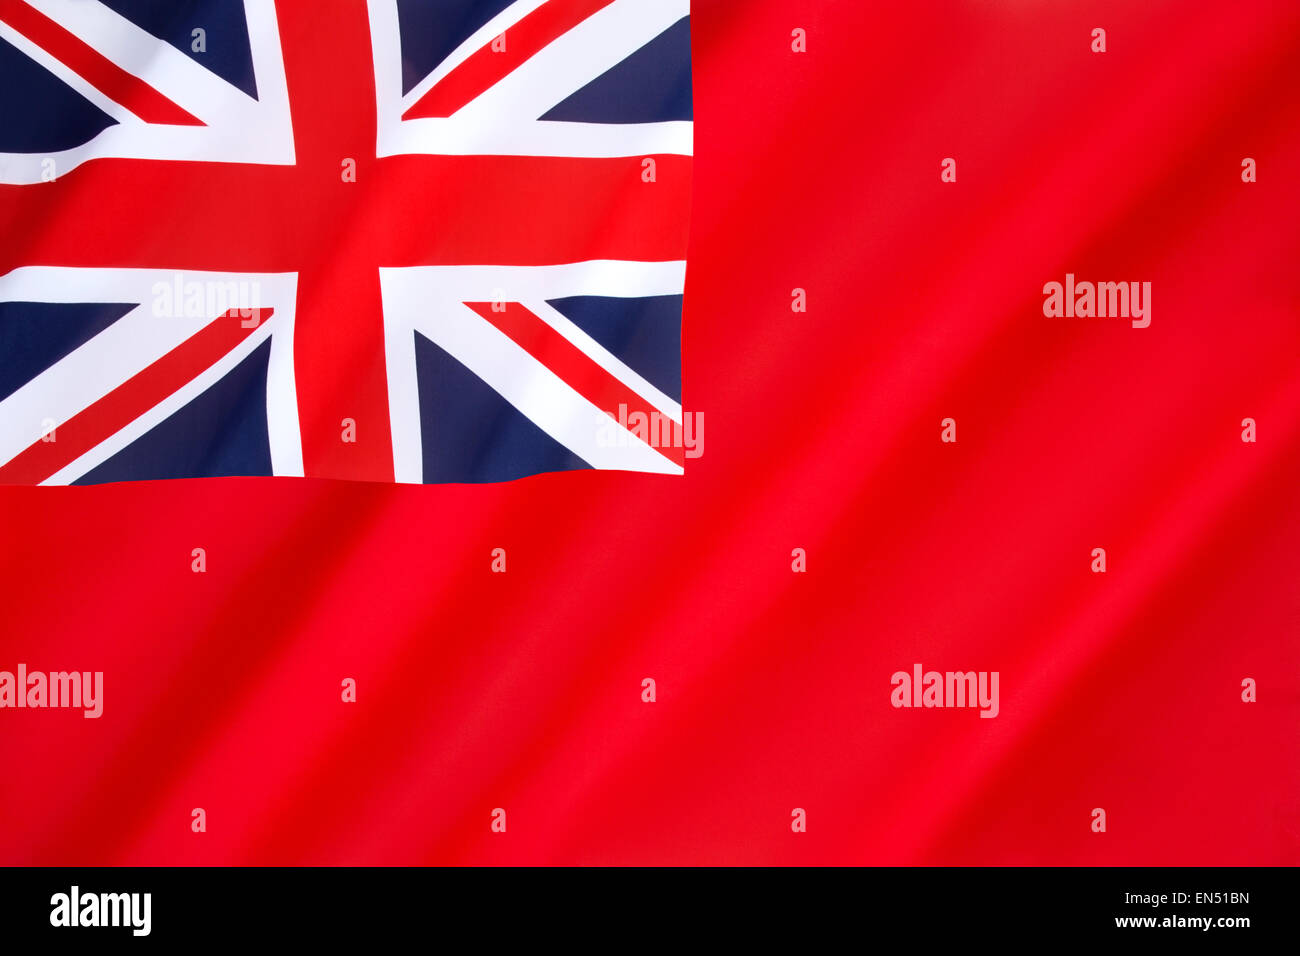 The British Red Ensign - flown by British-registered ships. Stock Photo